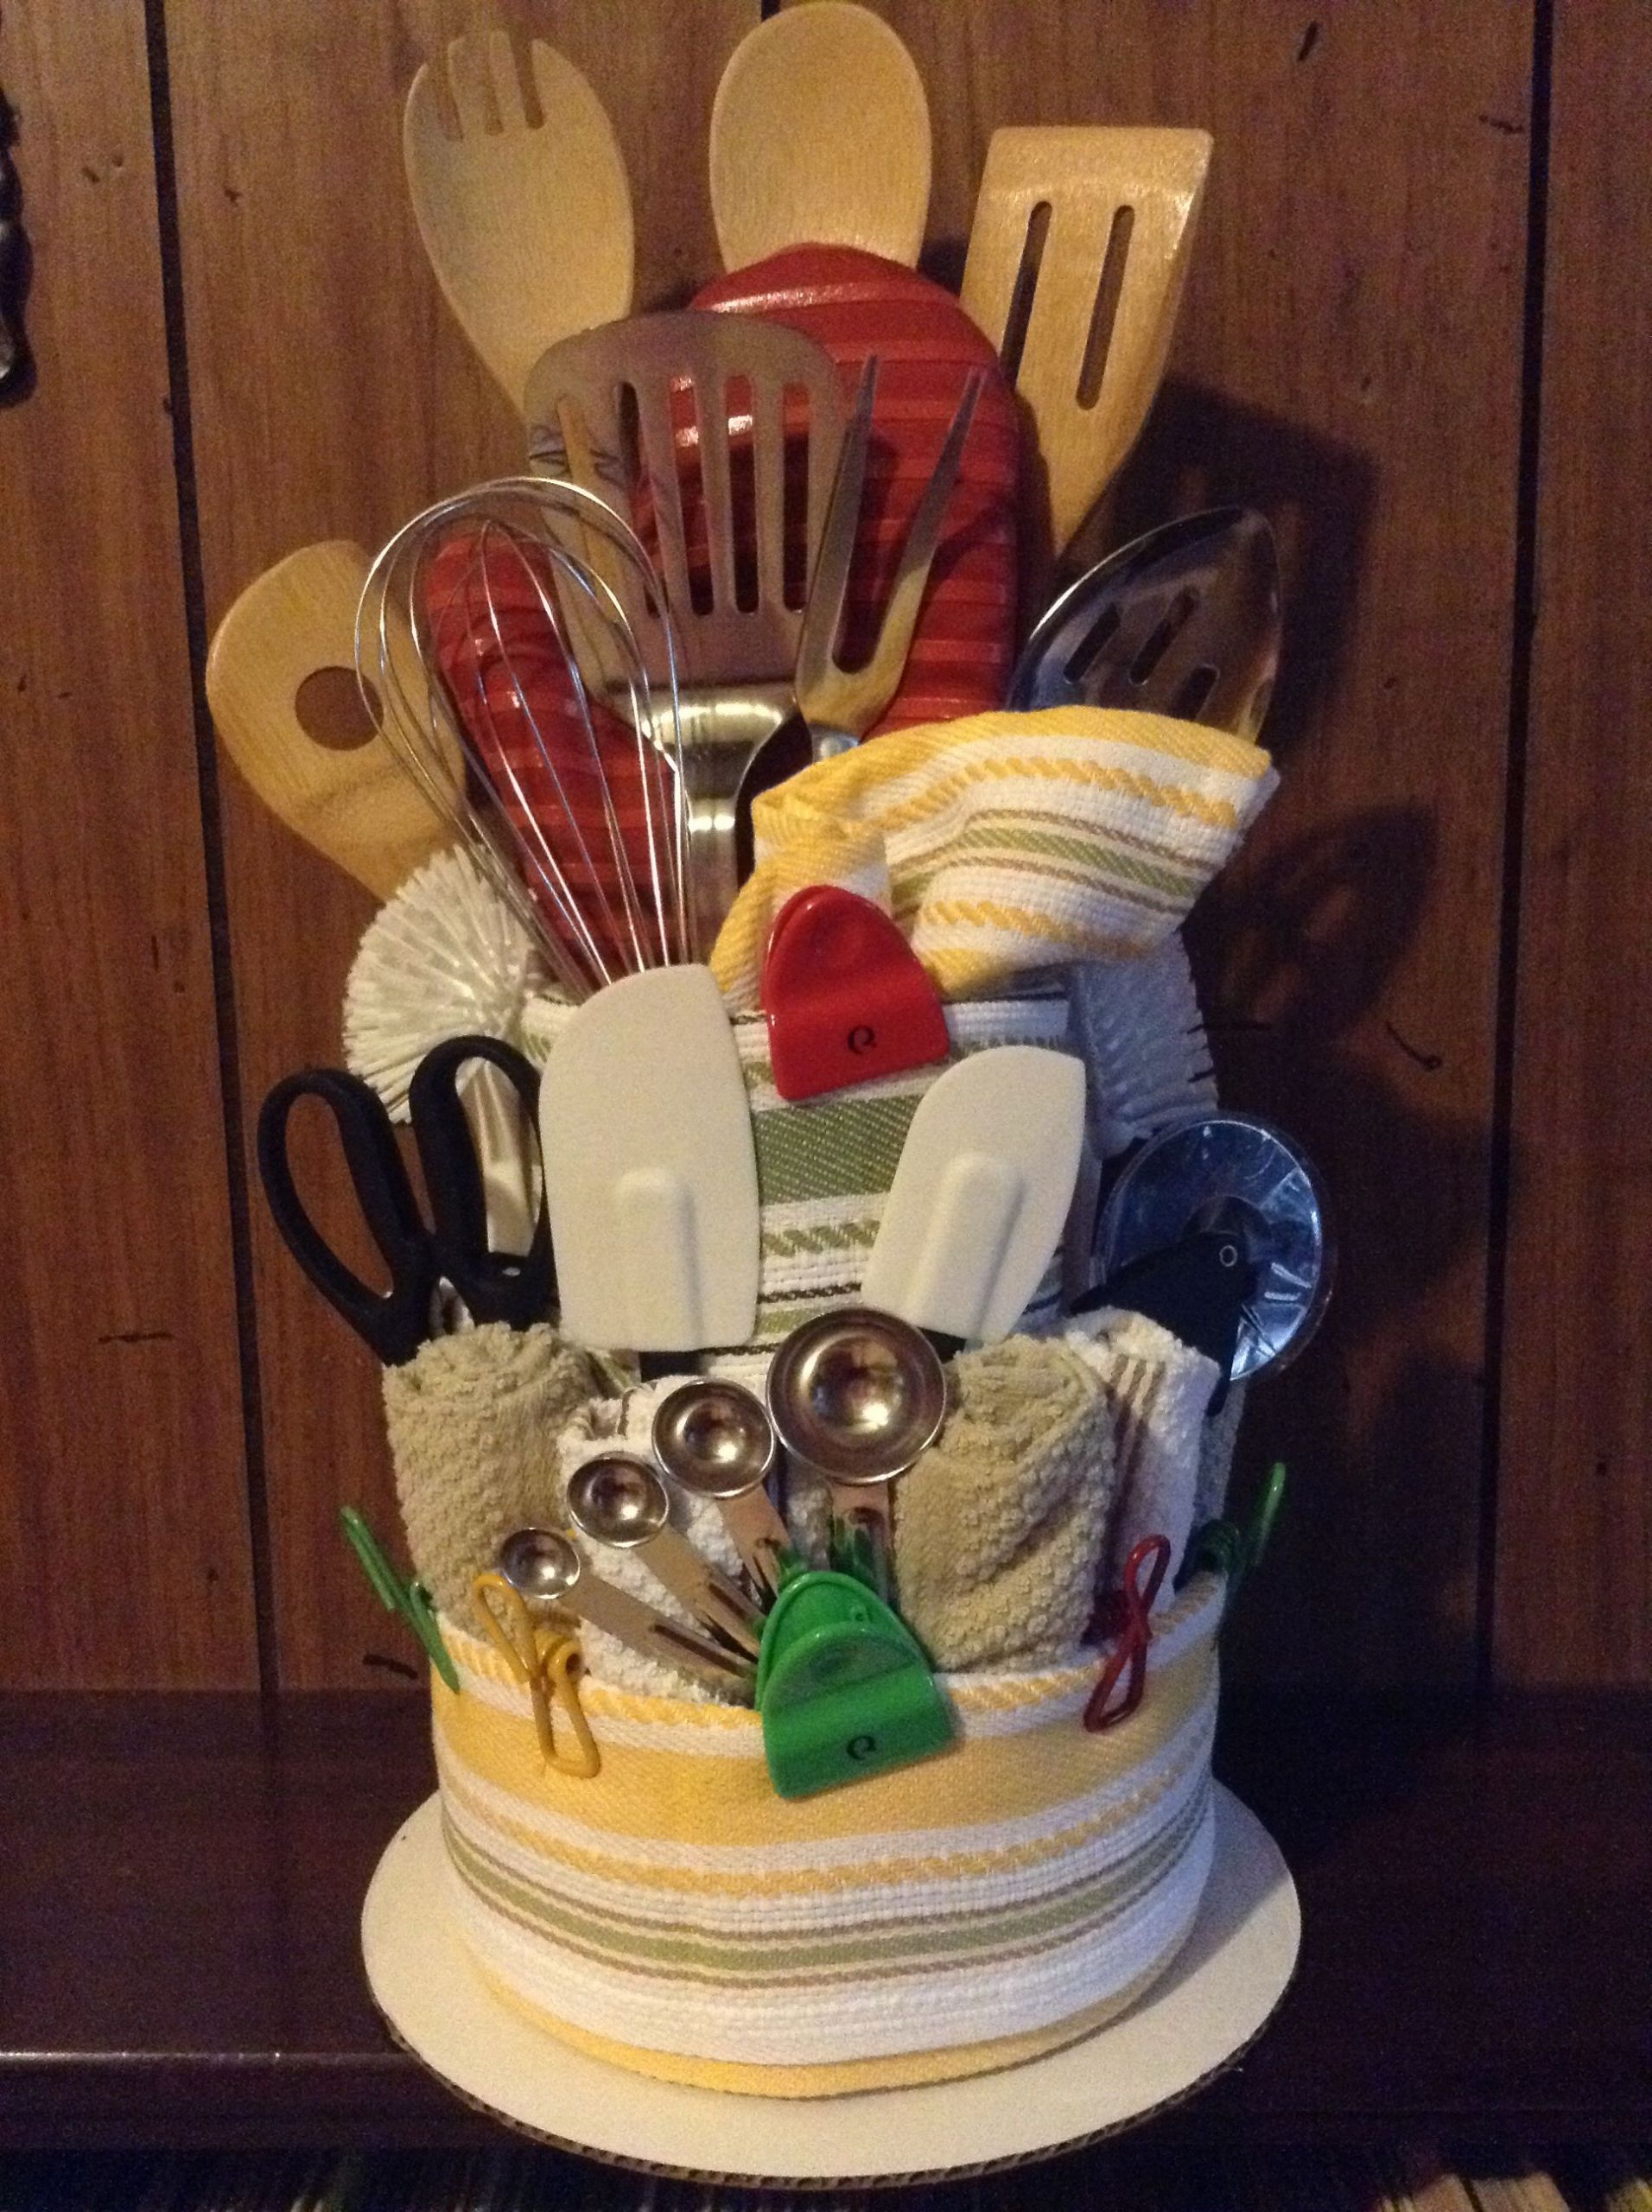 Towel Gift Basket Ideas
 Kitchen dish towel cake my mom and I made as a wedding